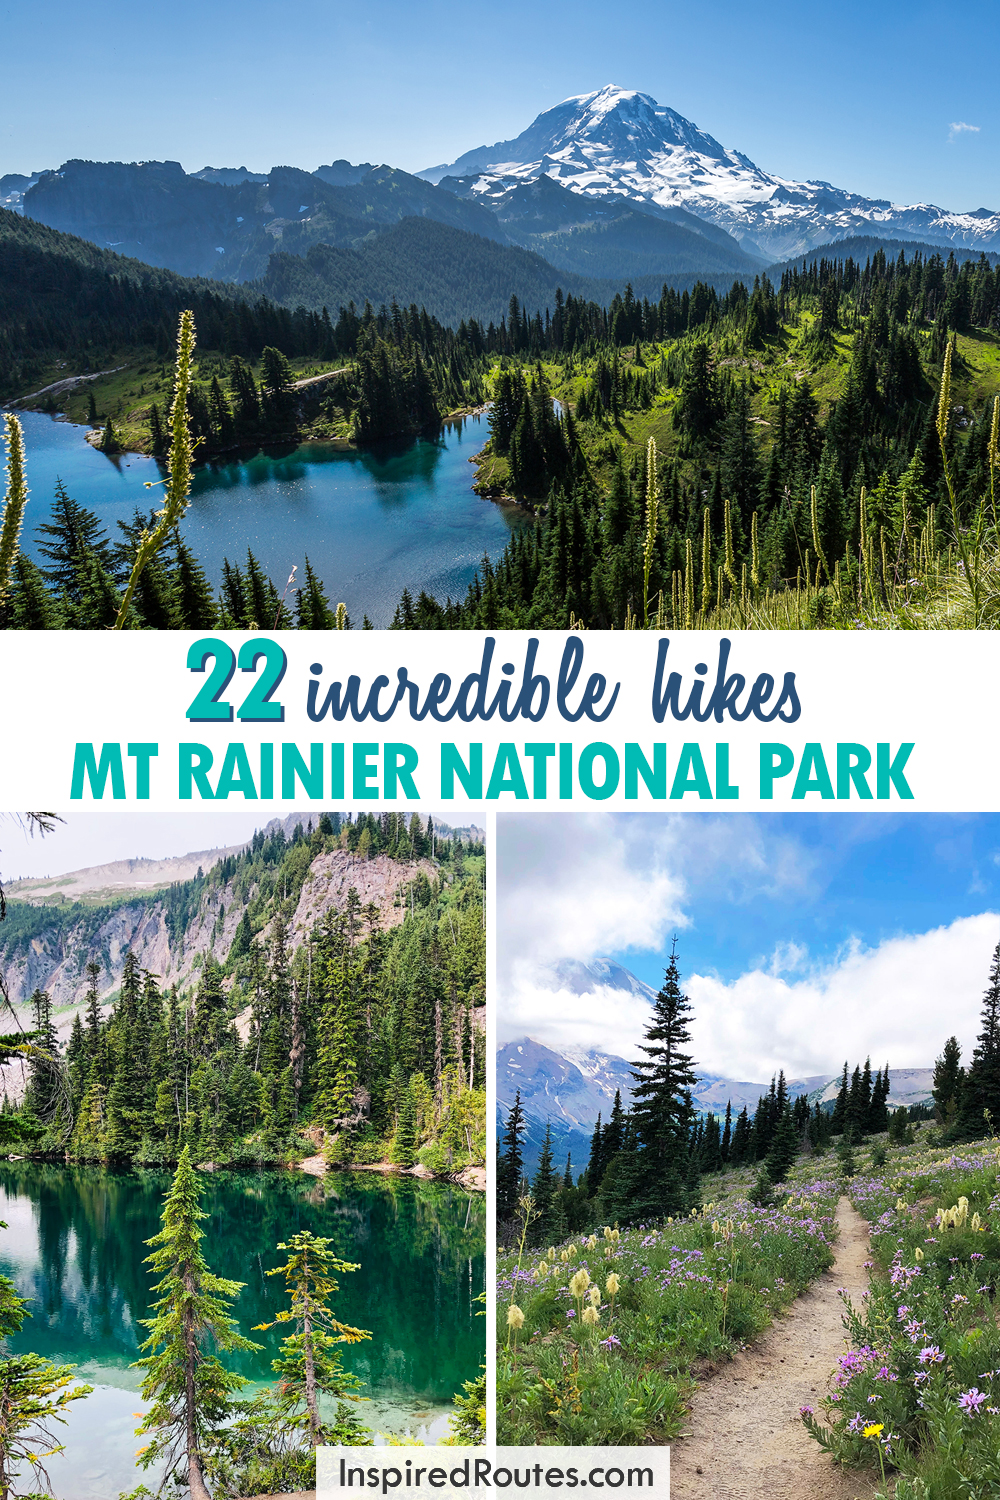 22 incredible hikes Mt Rainier national park with three images of mountains, lake and wildflowers and hiking trail